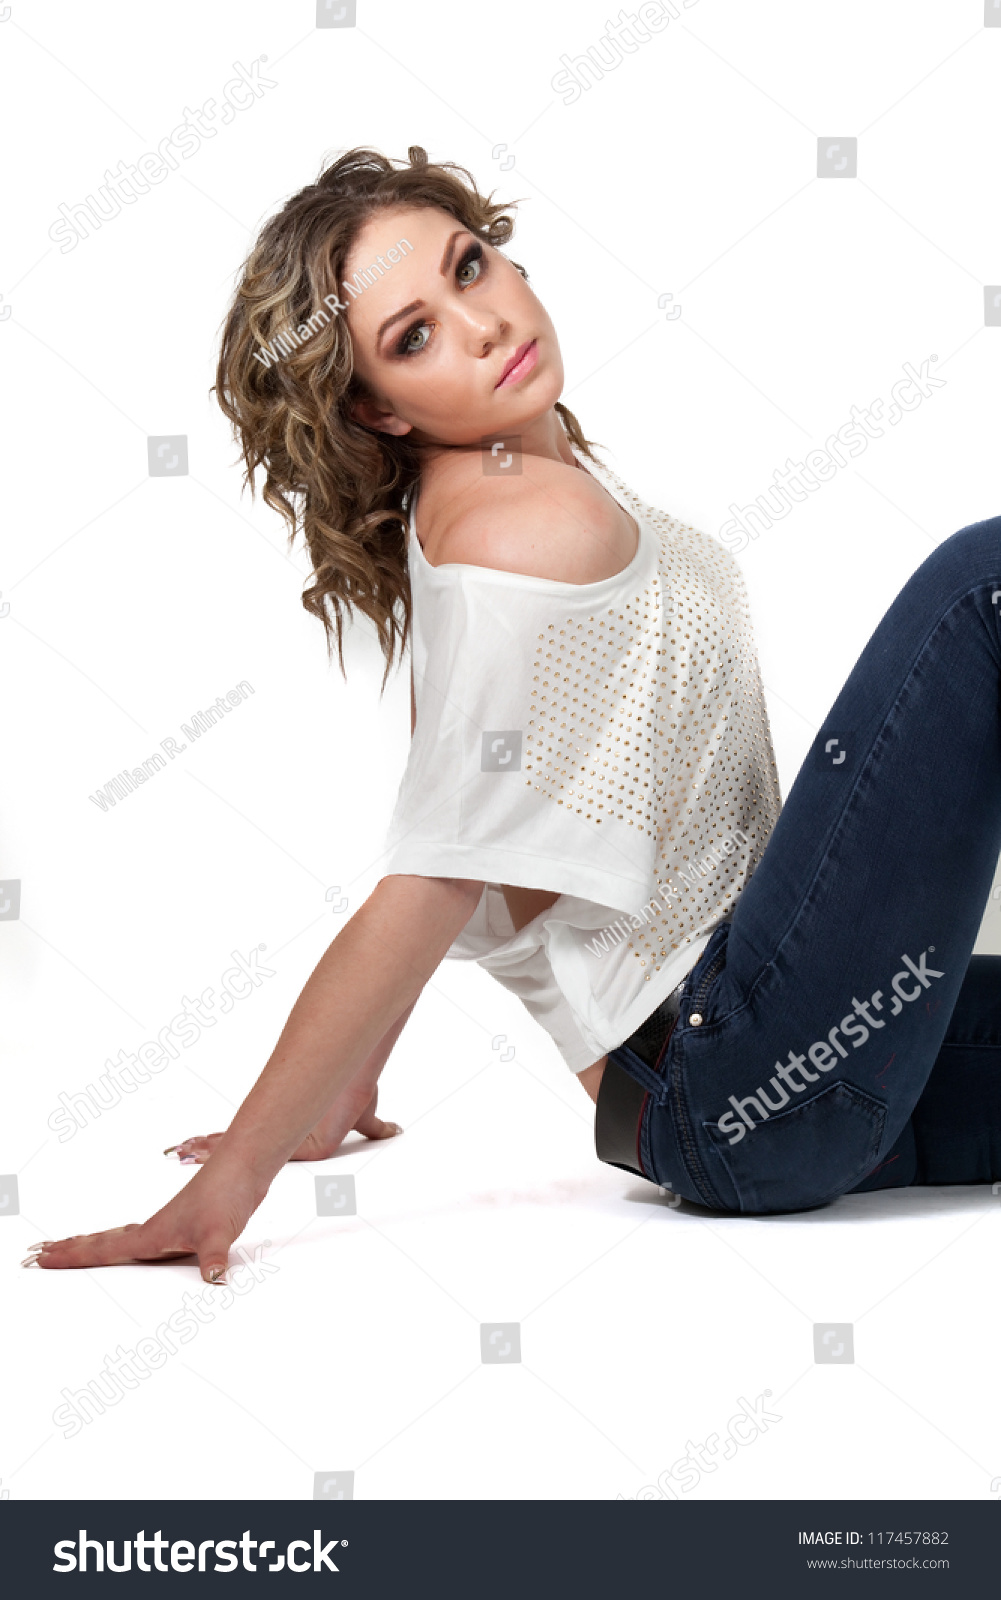 stock-photo-young-lady-sitting-a-leaning-back-on-her-hands-117457882.jpg